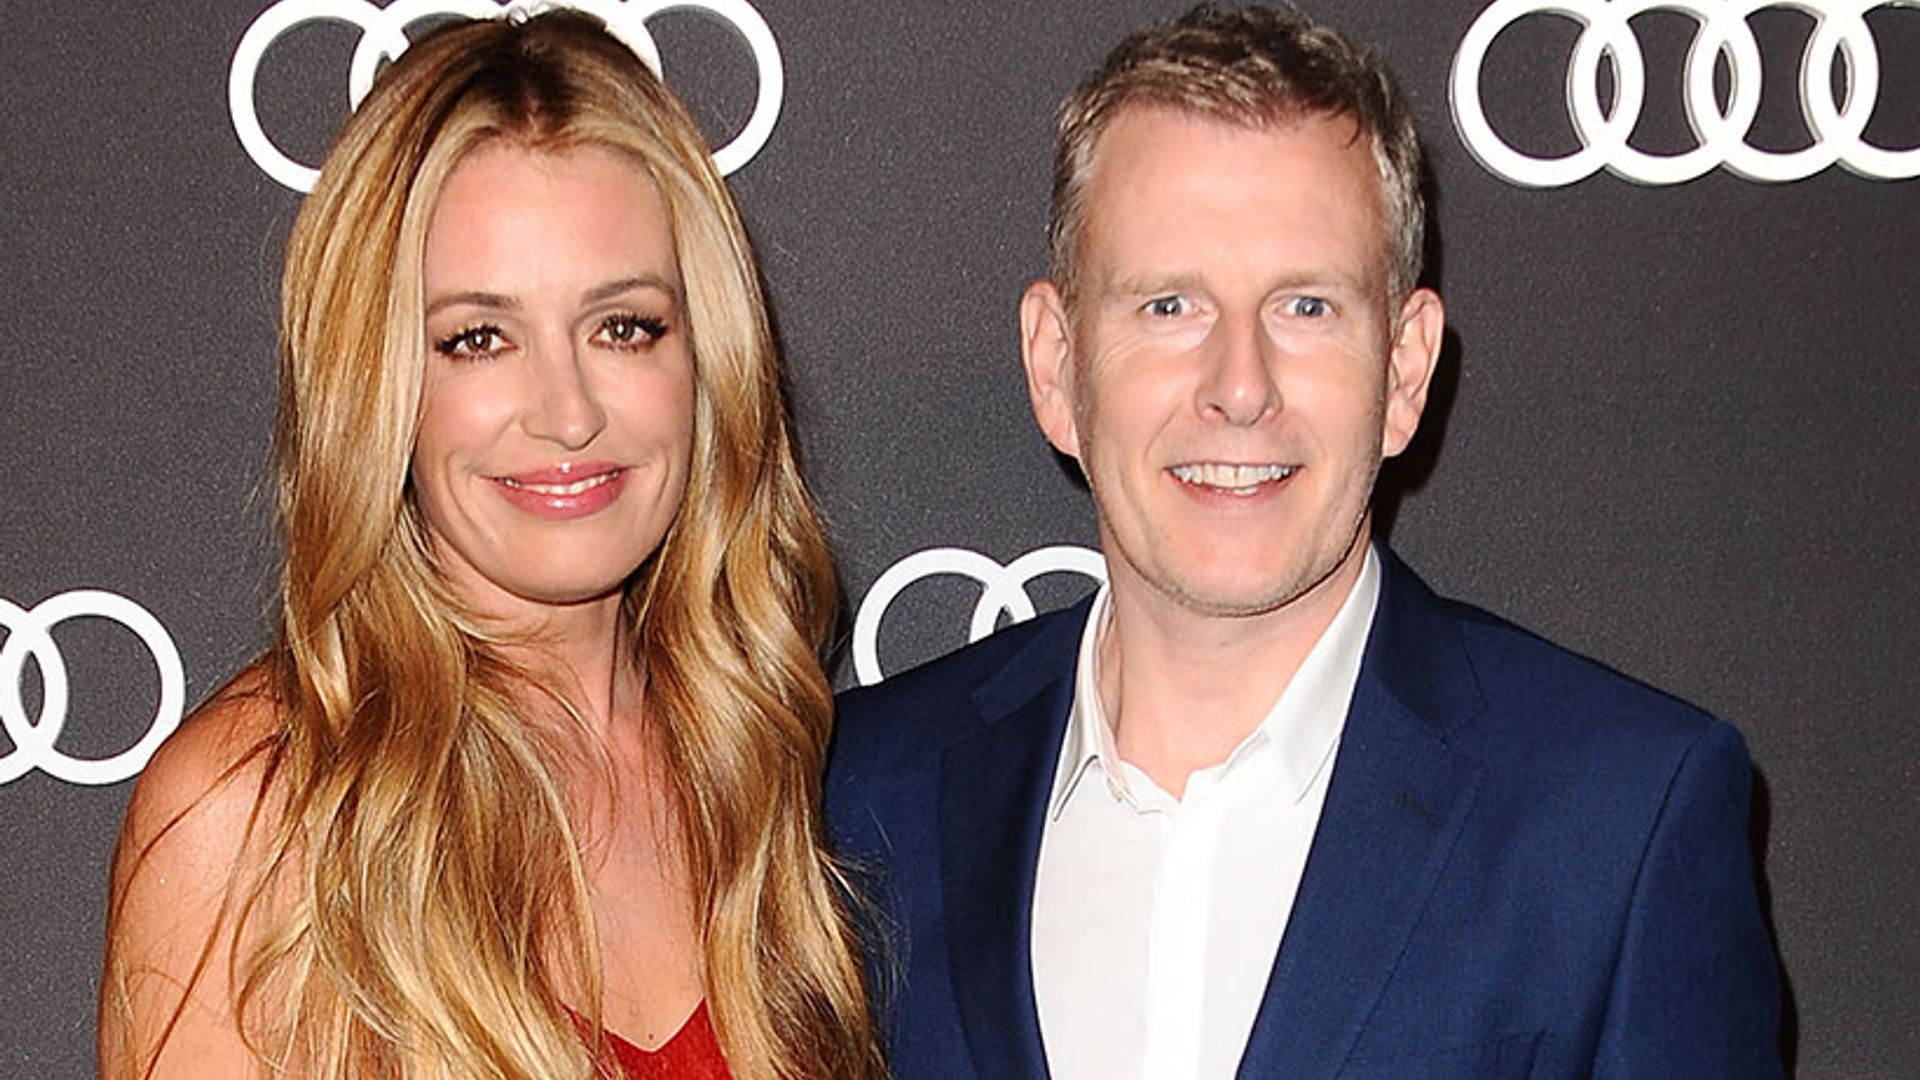 Cat Deeley and Patrick Kielty celebrate their fifth wedding anniversary with the sweetest photo – see it here!